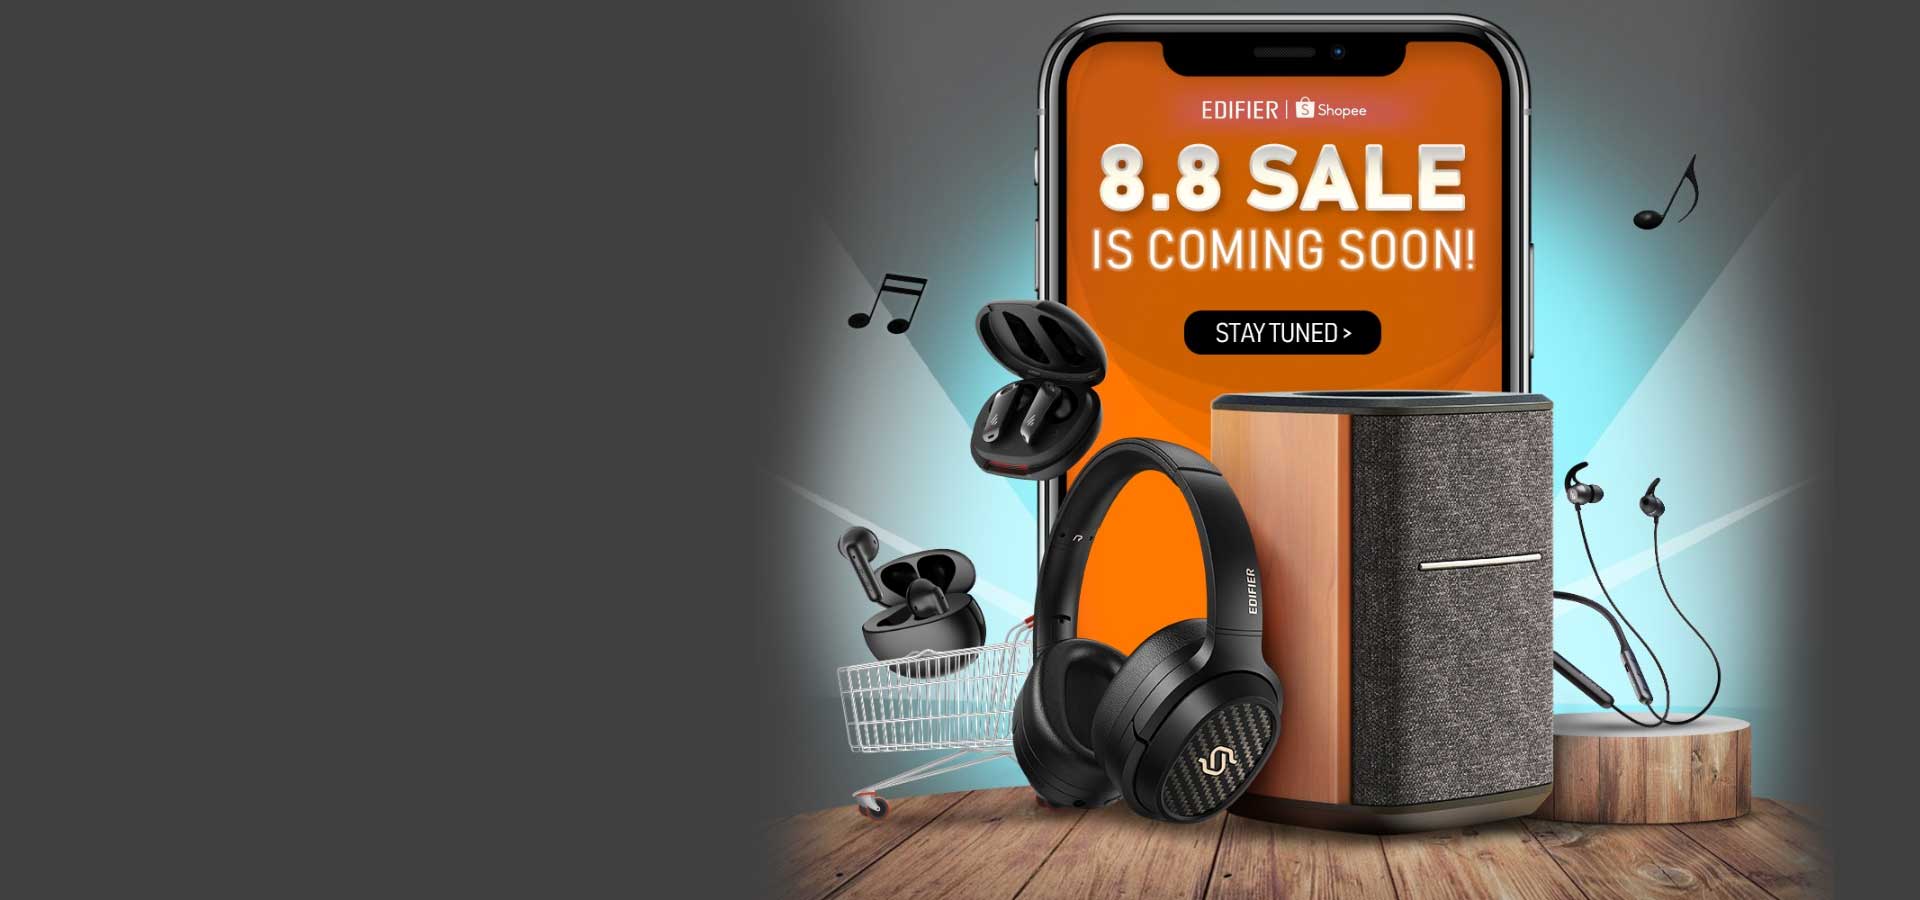 8.8 Shopee Sale is Coming!